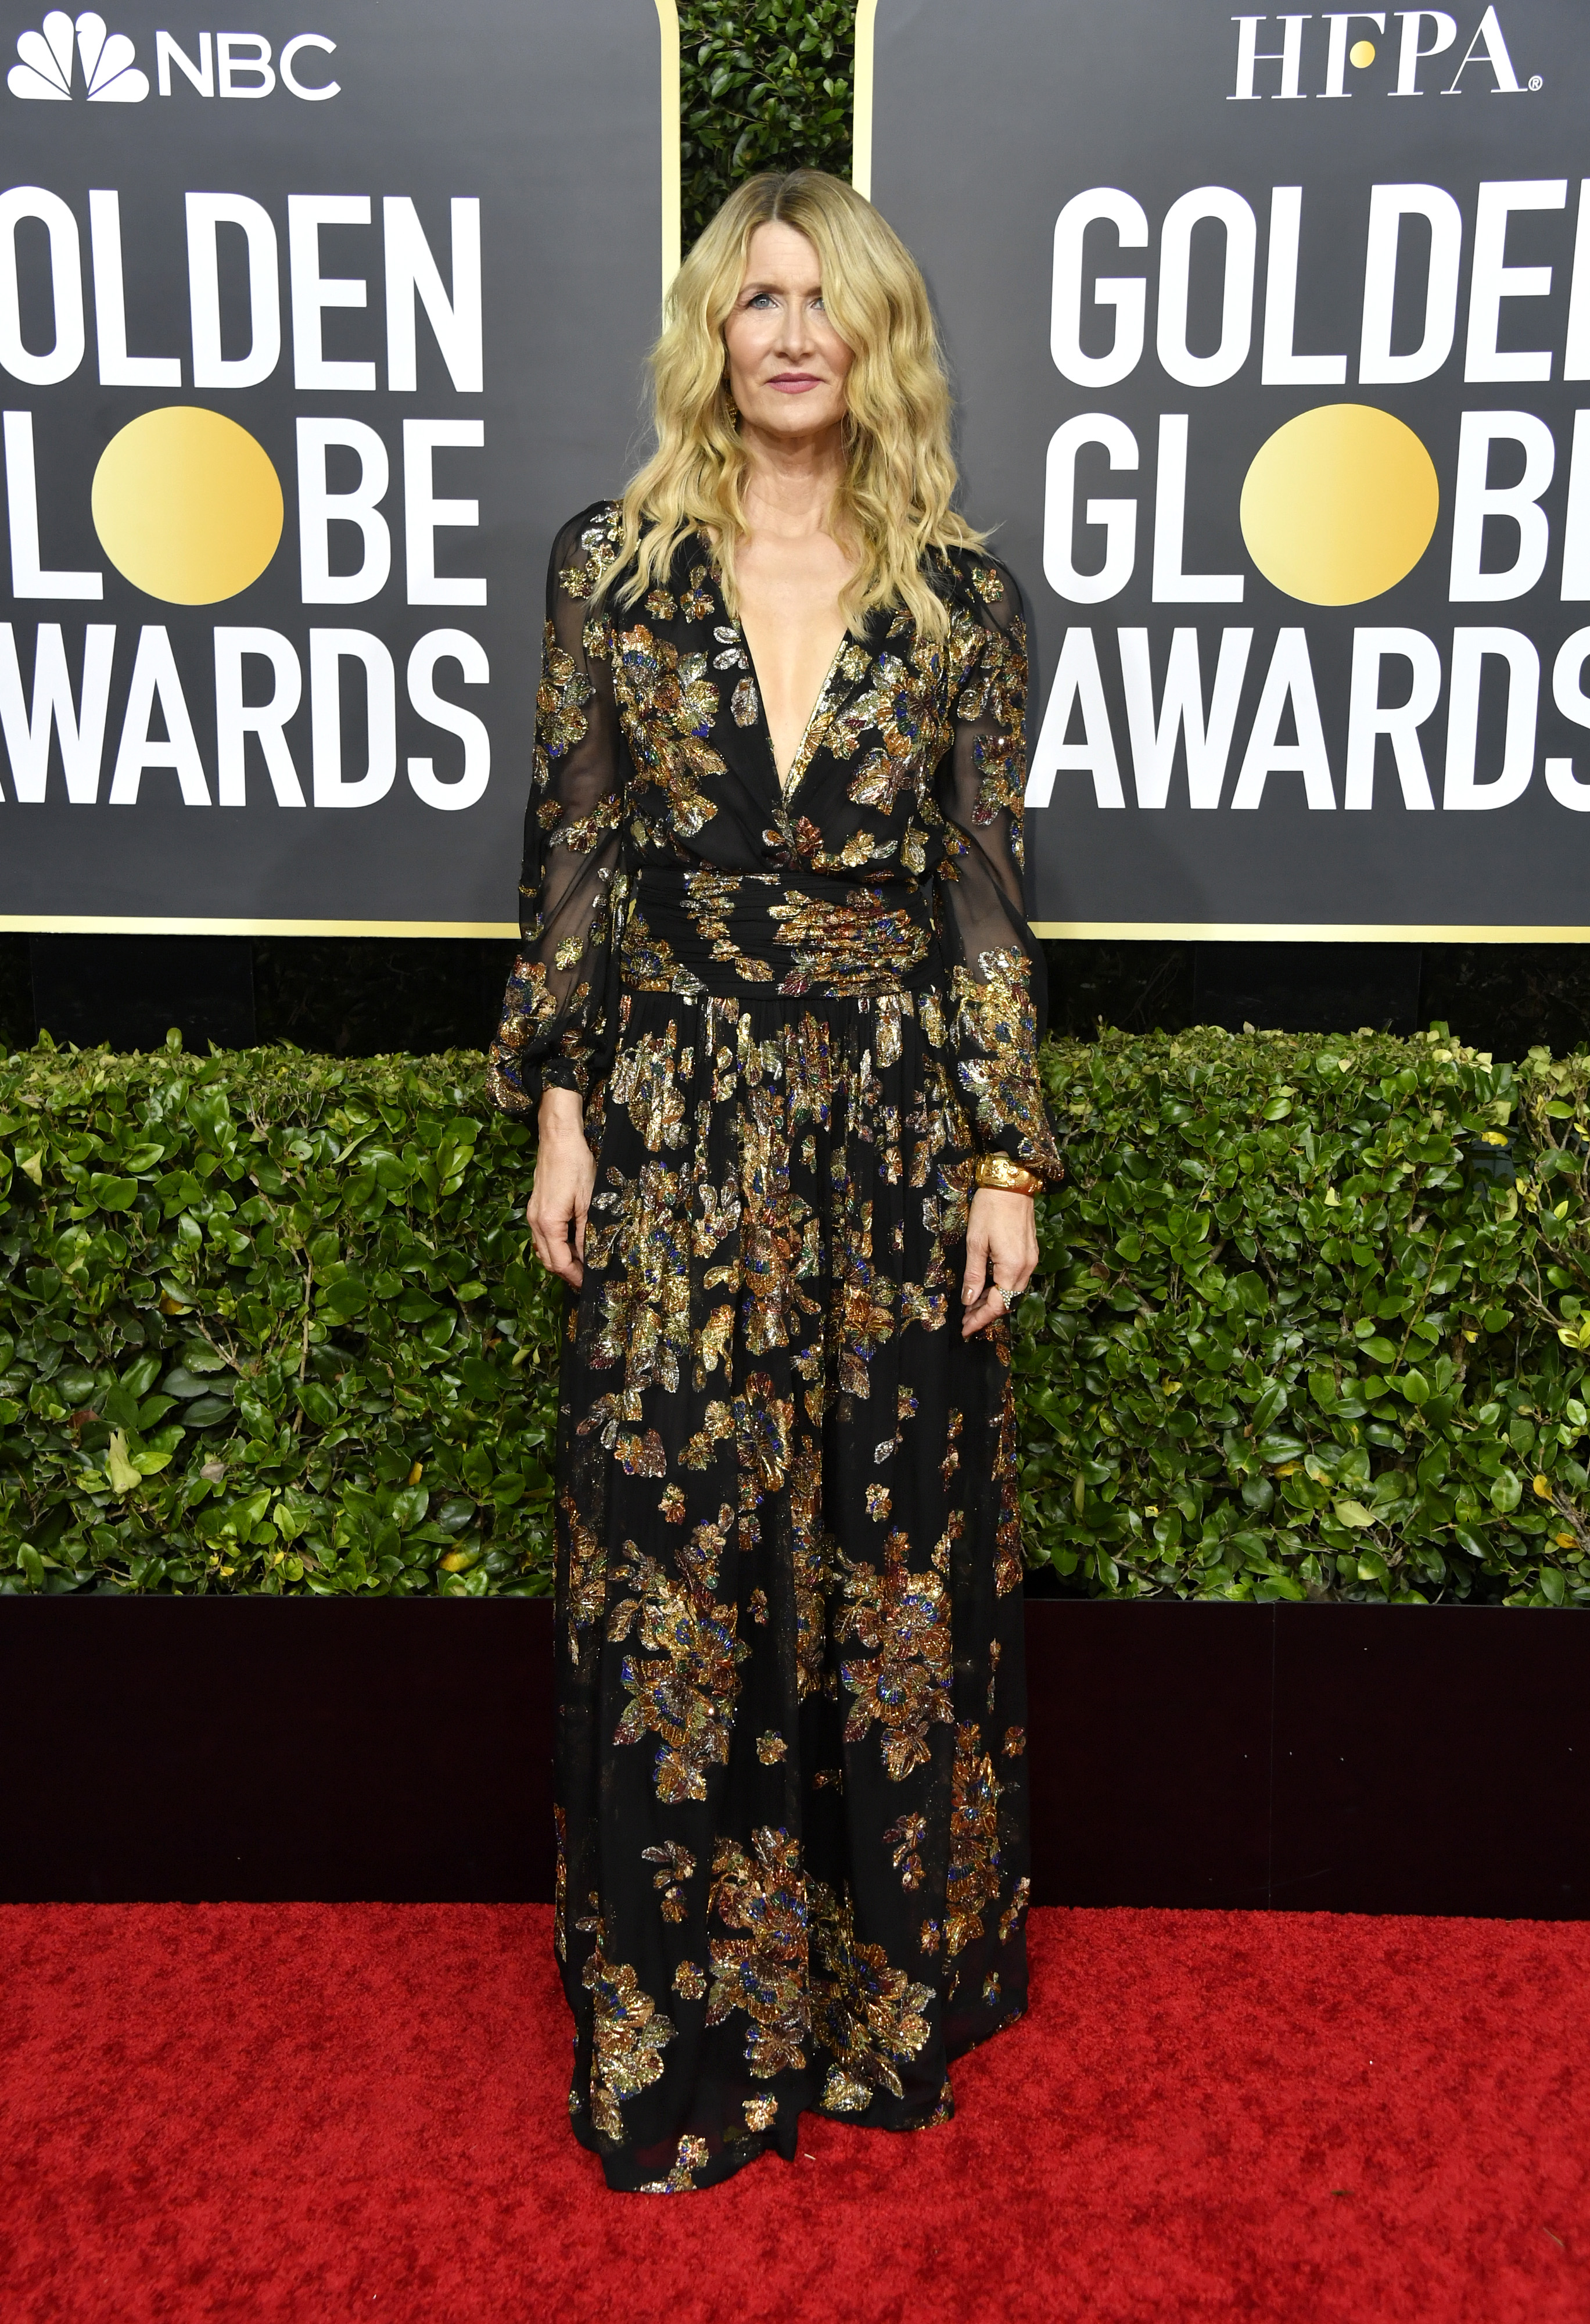 BEVERLY HILLS, CALIFORNIA - JANUARY 05: Laura Dern attends the 77th Annual Golden Globe Awards at The Beverly Hilton Hotel on January 05, 2020 in Beverly Hills, California. (Photo by Frazer Harrison/Getty Images)